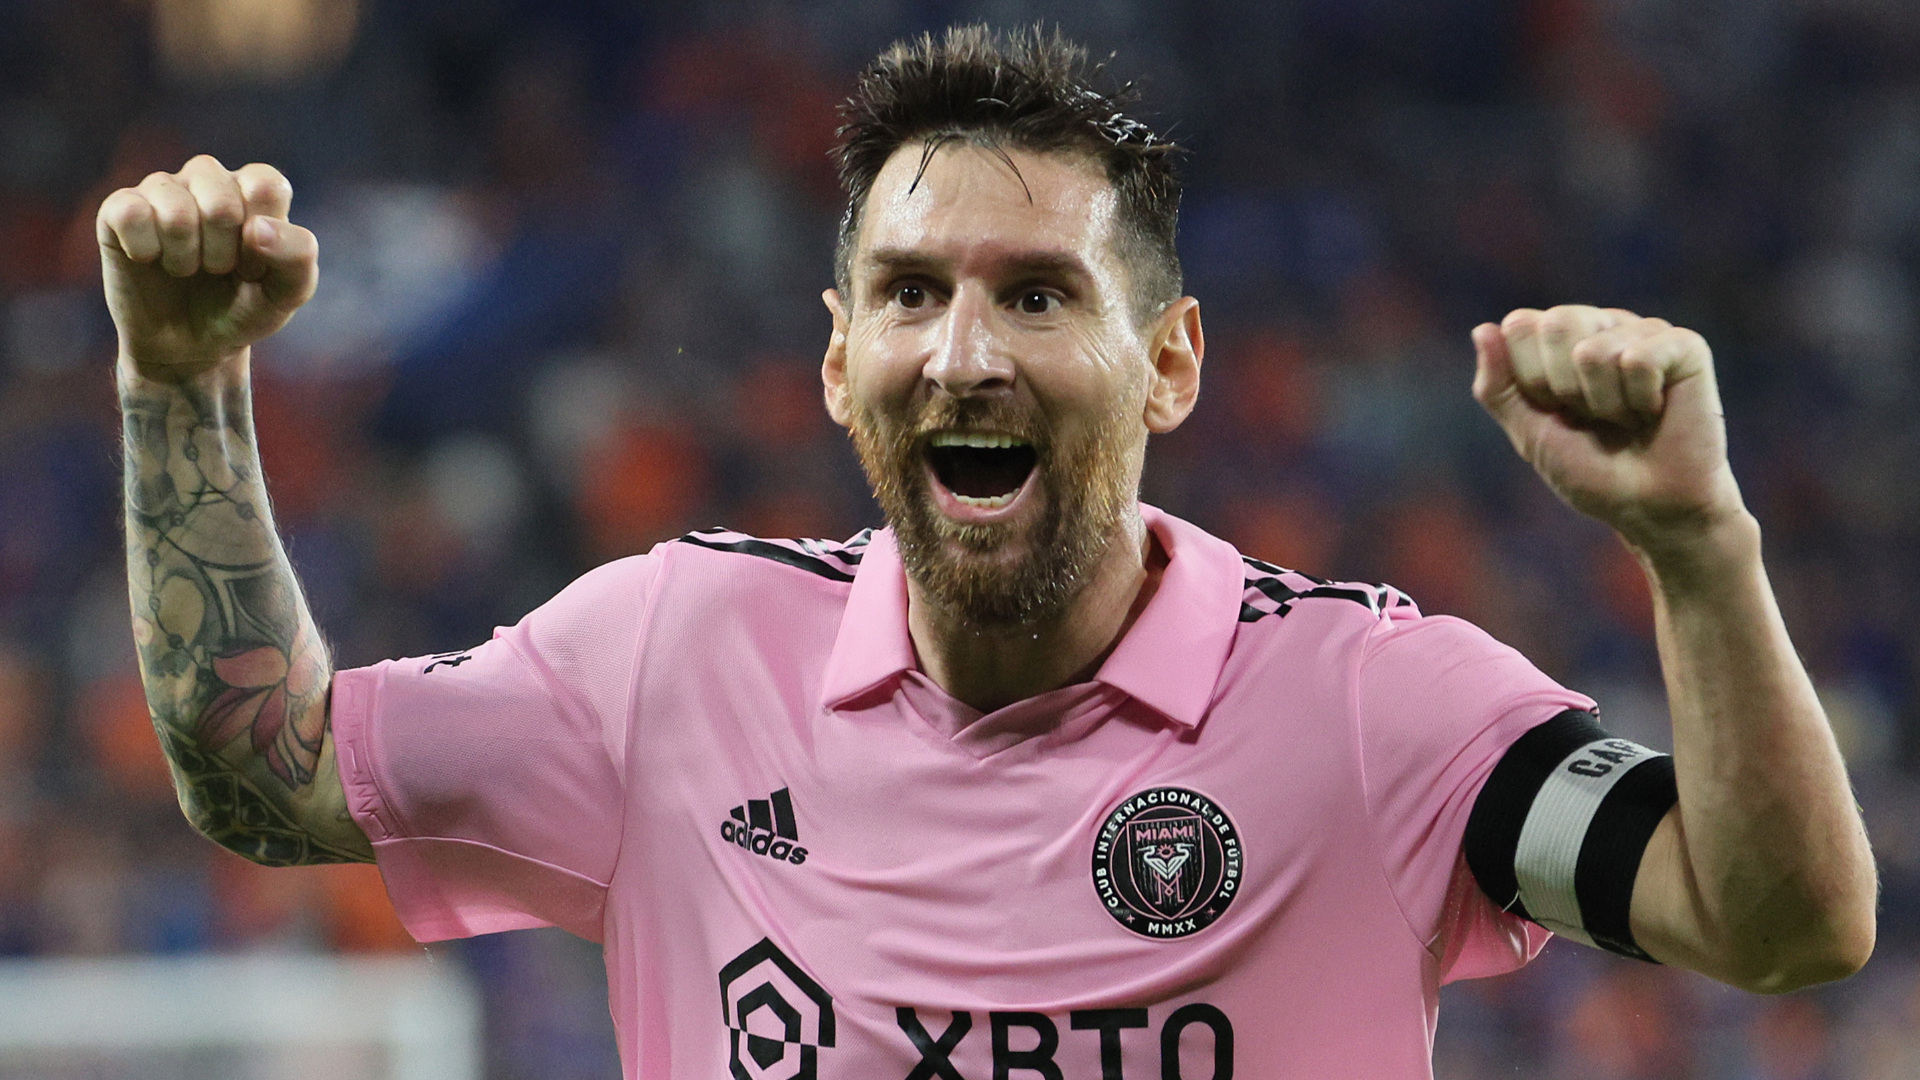 revealed-the-lionel-messi-goal-used-to-inspire-next-generation-of-talent-at-mls-side-inter-miami-after-witnessing-perfection-from-argentine-icon-or-goal-com-india